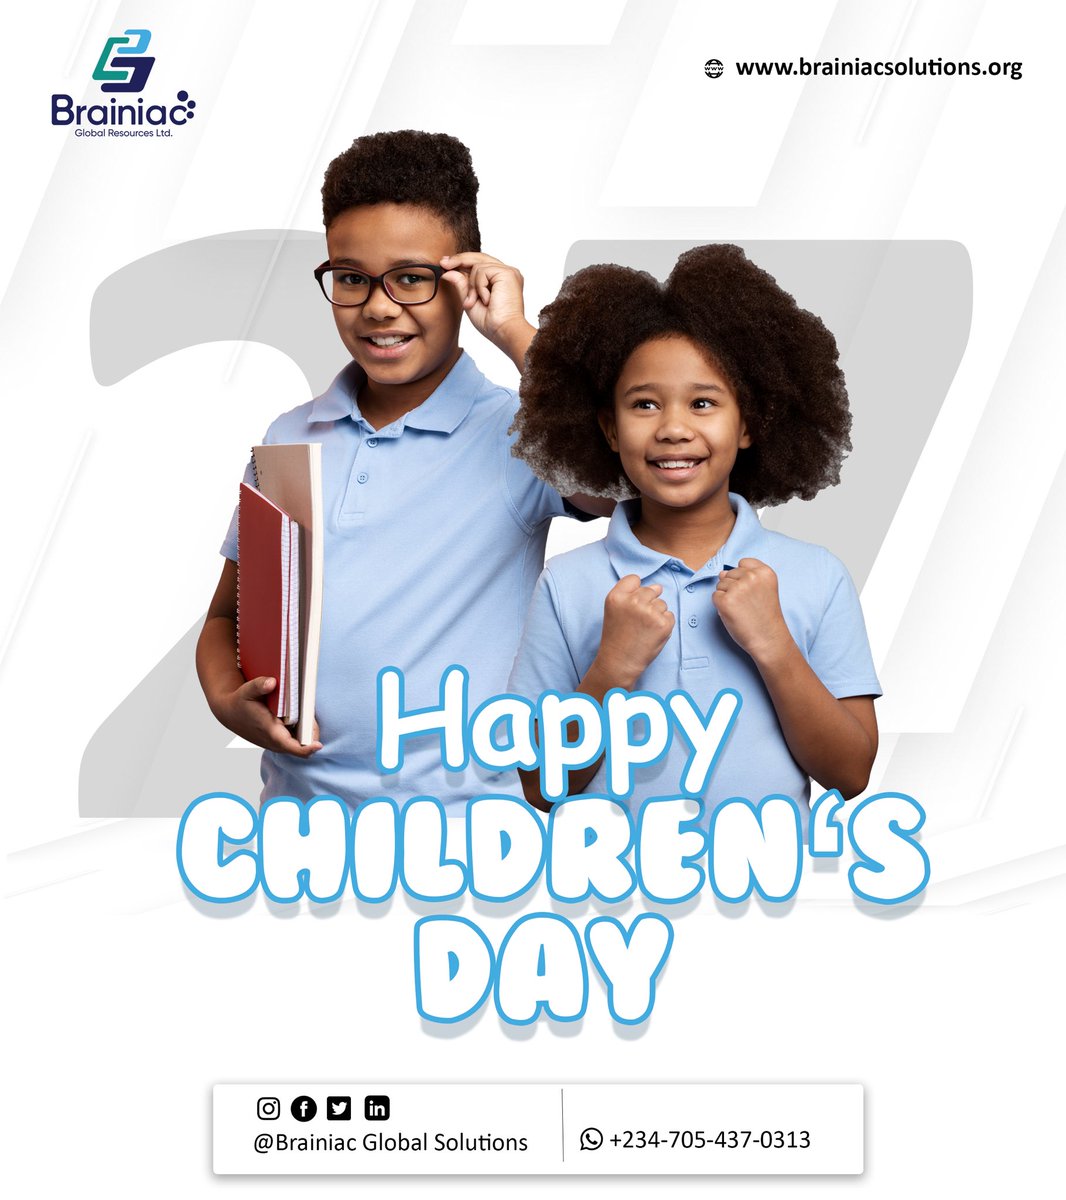 Celebrating the joy, laughter, and dreams of every child today! Happy Children’s Day! 🌟🎉🎉🎉

Call +234-705-437-0313 and talk to our experts.

#brainiacglobalsolutions #newmonth #may #workersday #Labourday #ecommercewebsite #itconsulting #uxuidesign  #ecommerce